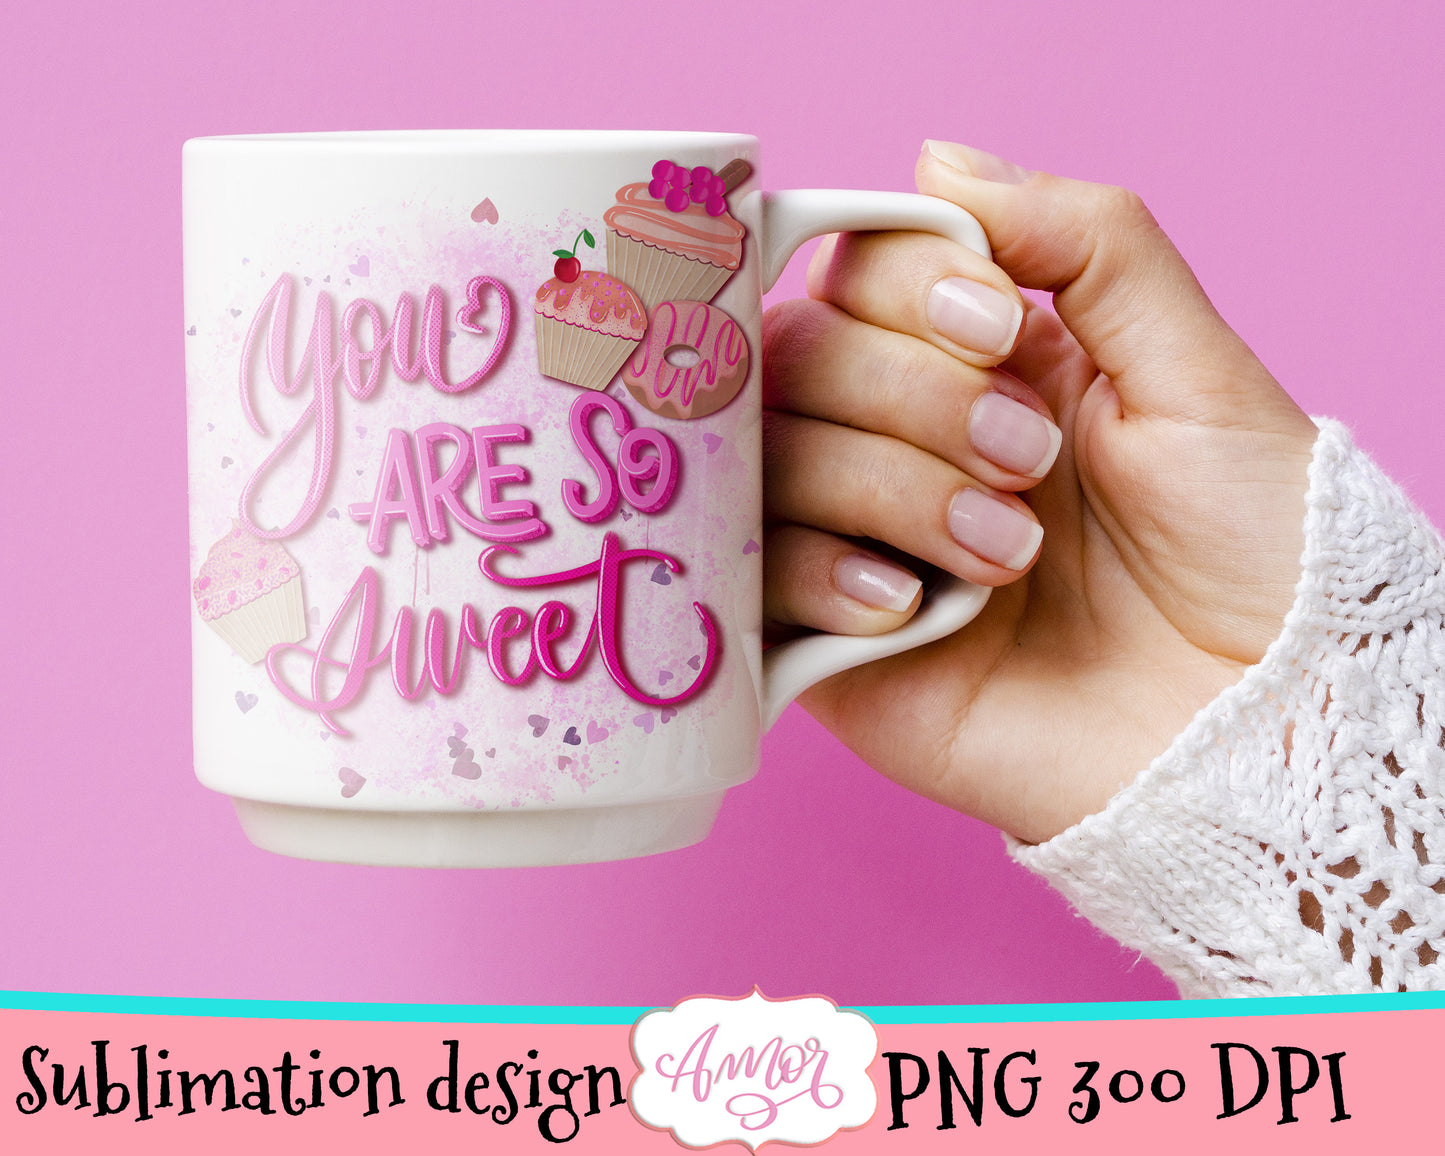 You are so sweet PNG for sublimation